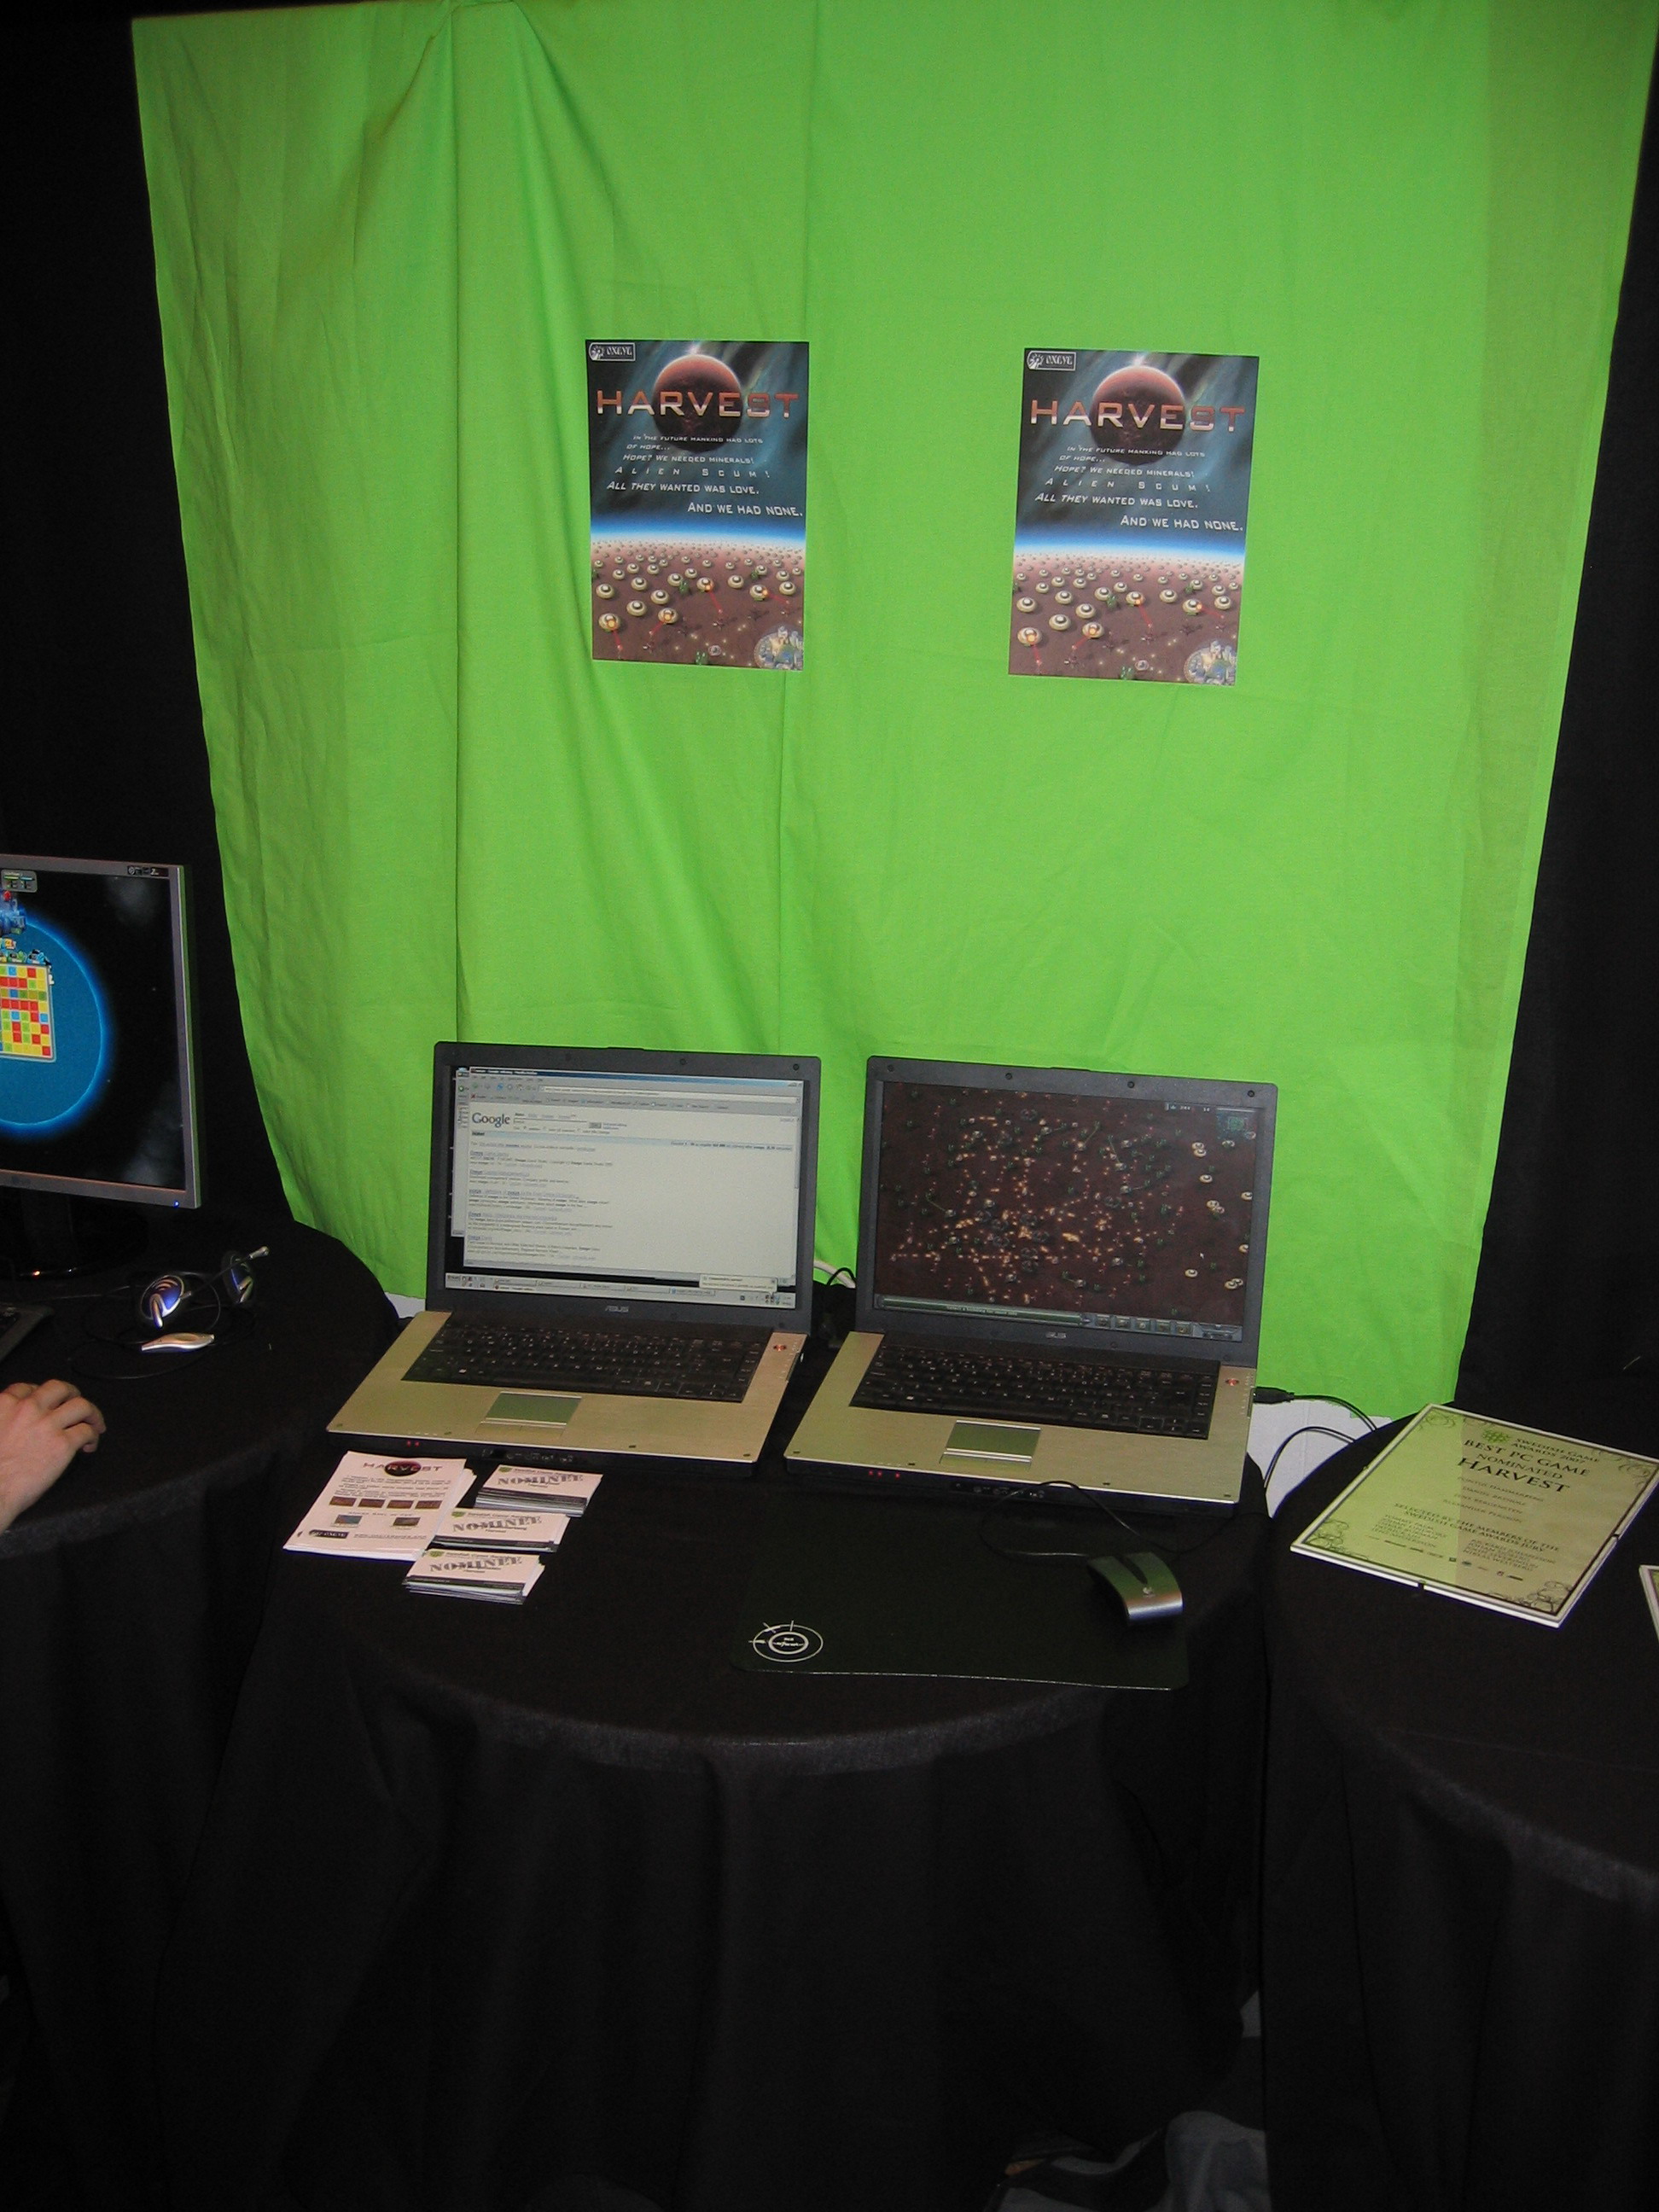 A picture of the Harvest: Massive Encounter stand at the Swedish Game Awards, featuring two laptops with the game in front of a green canvas with posters of the game.